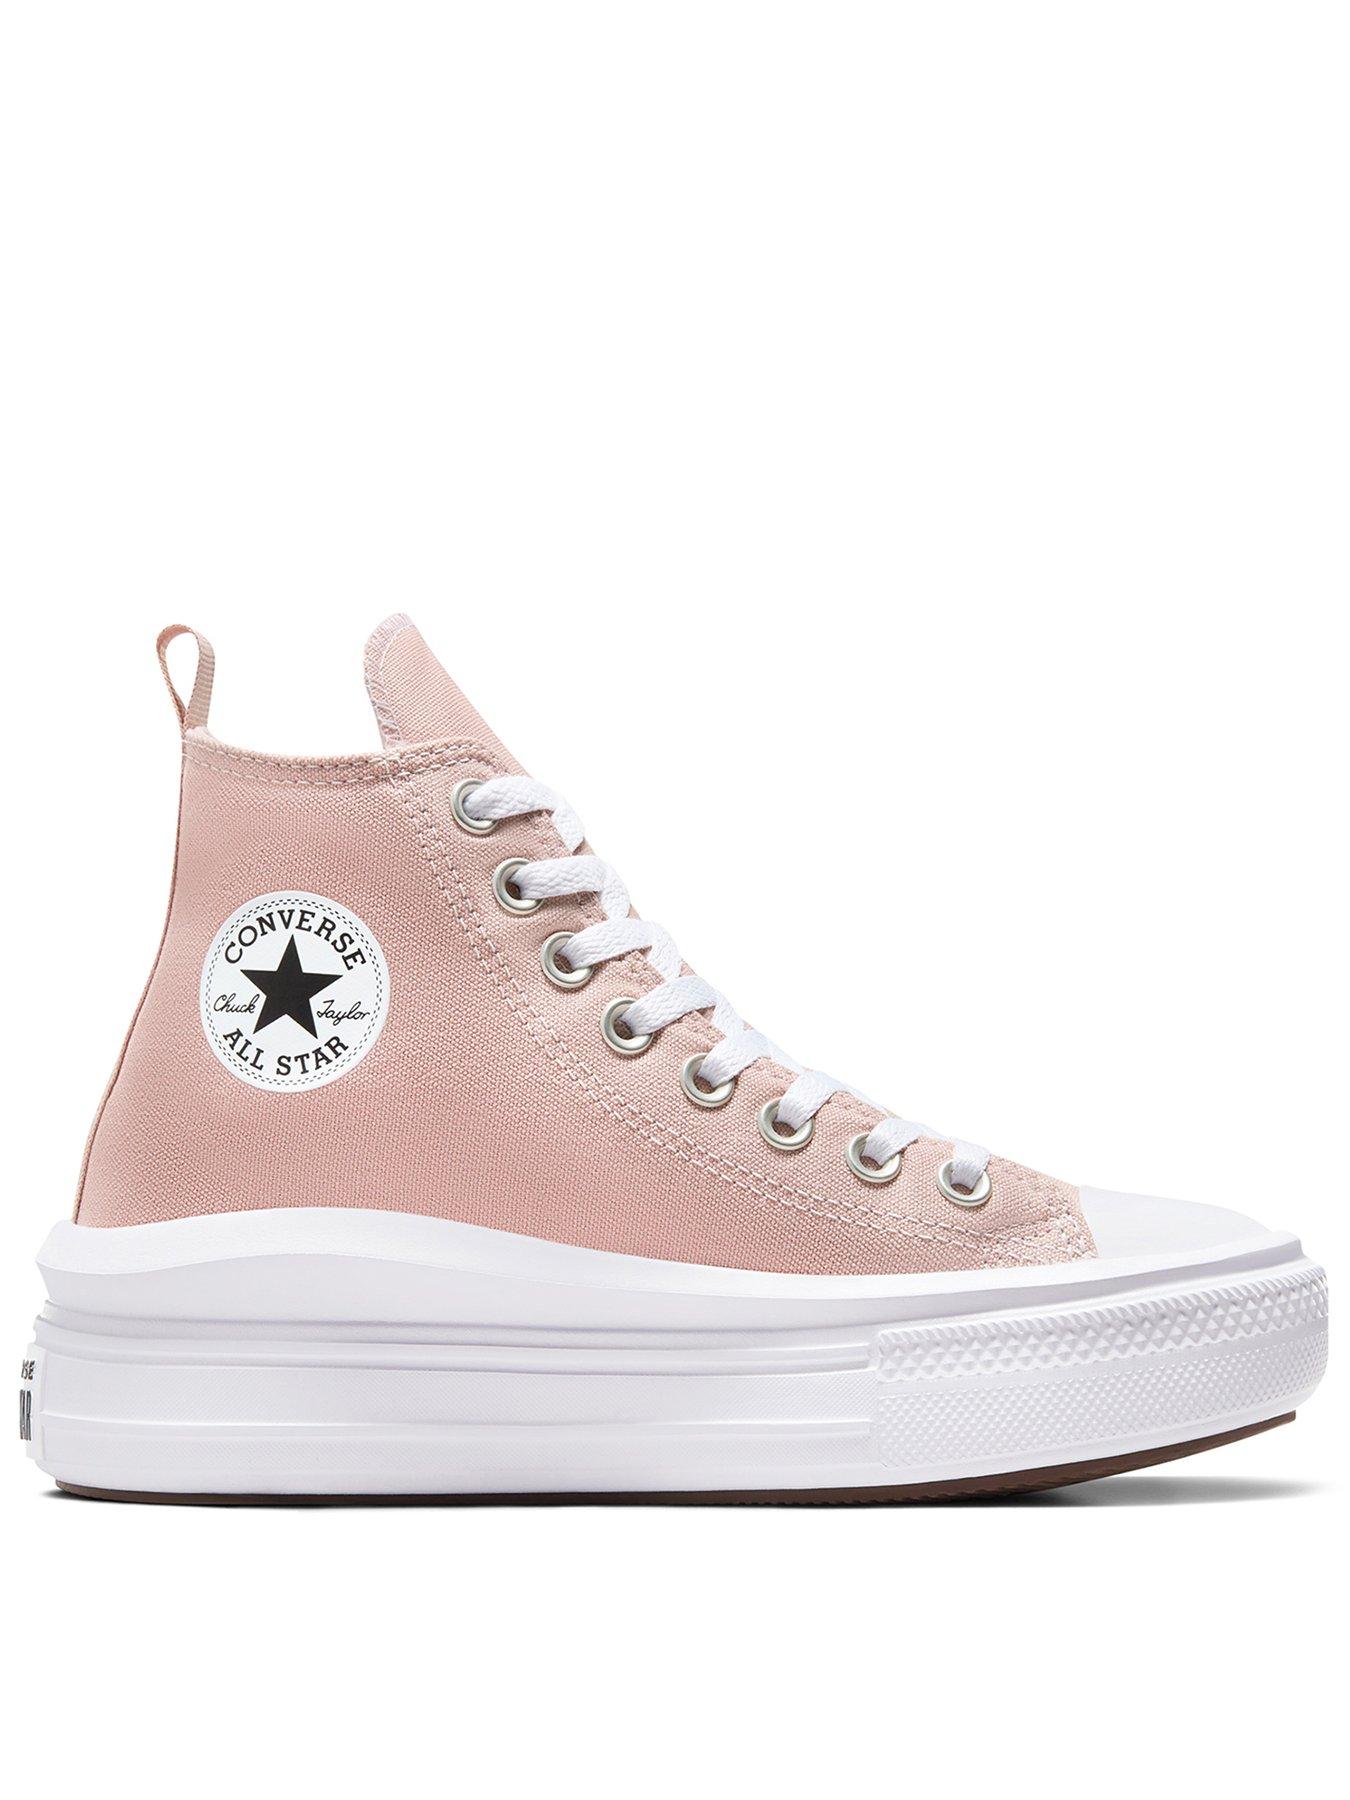 Converse Junior Girls Move Seasonal Color High Tops Trainers - Pink, Pink, Size 4.5 Older